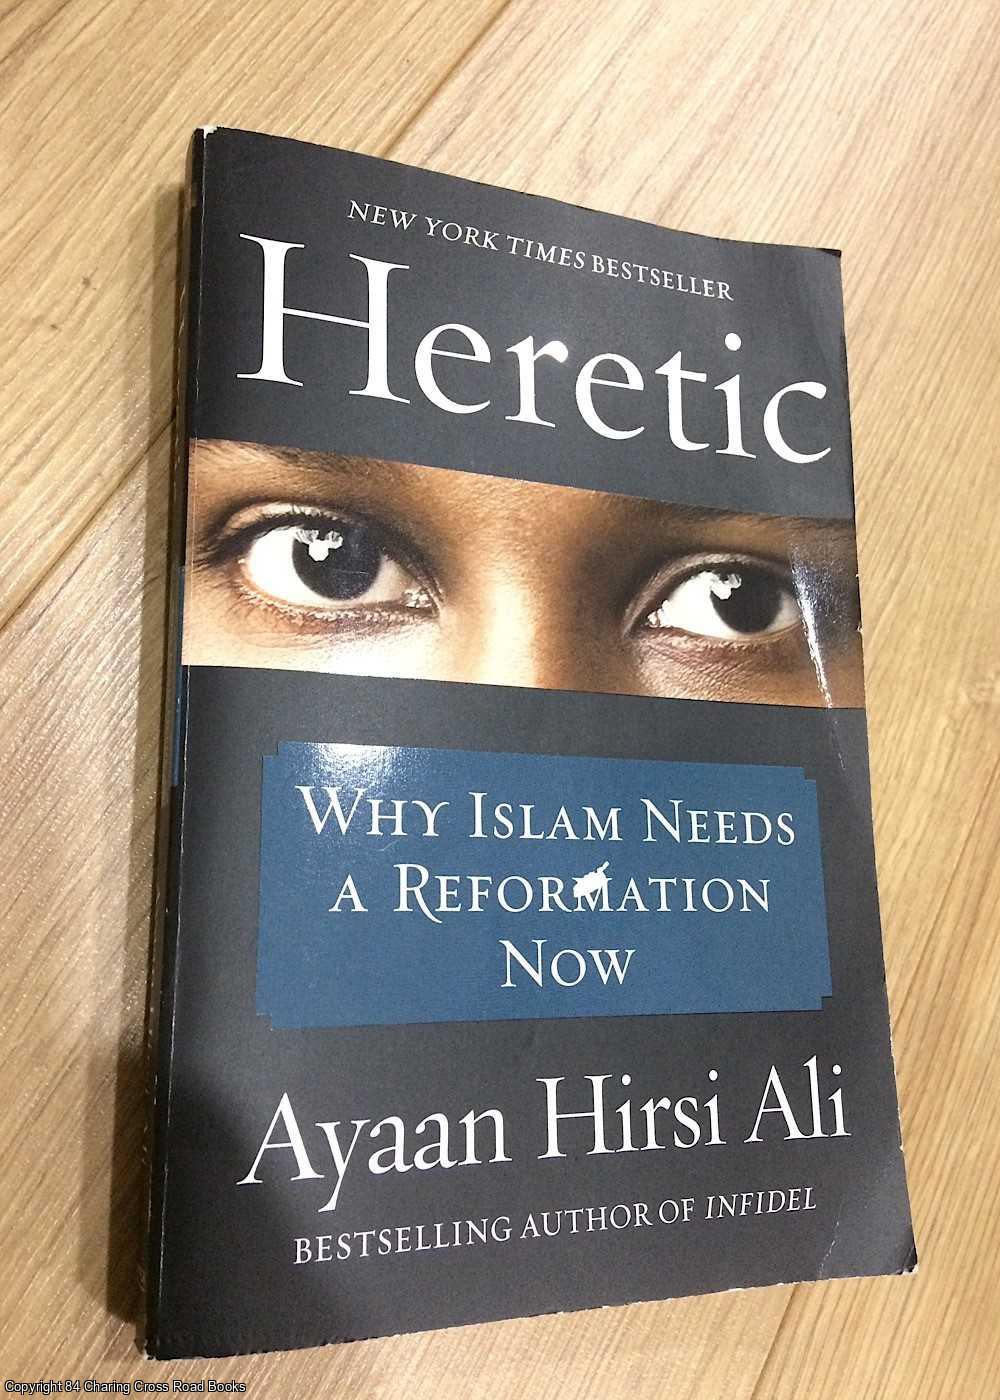 Ayaan Hirsi Ali - Heretic: Why Islam Needs a Reformation Now